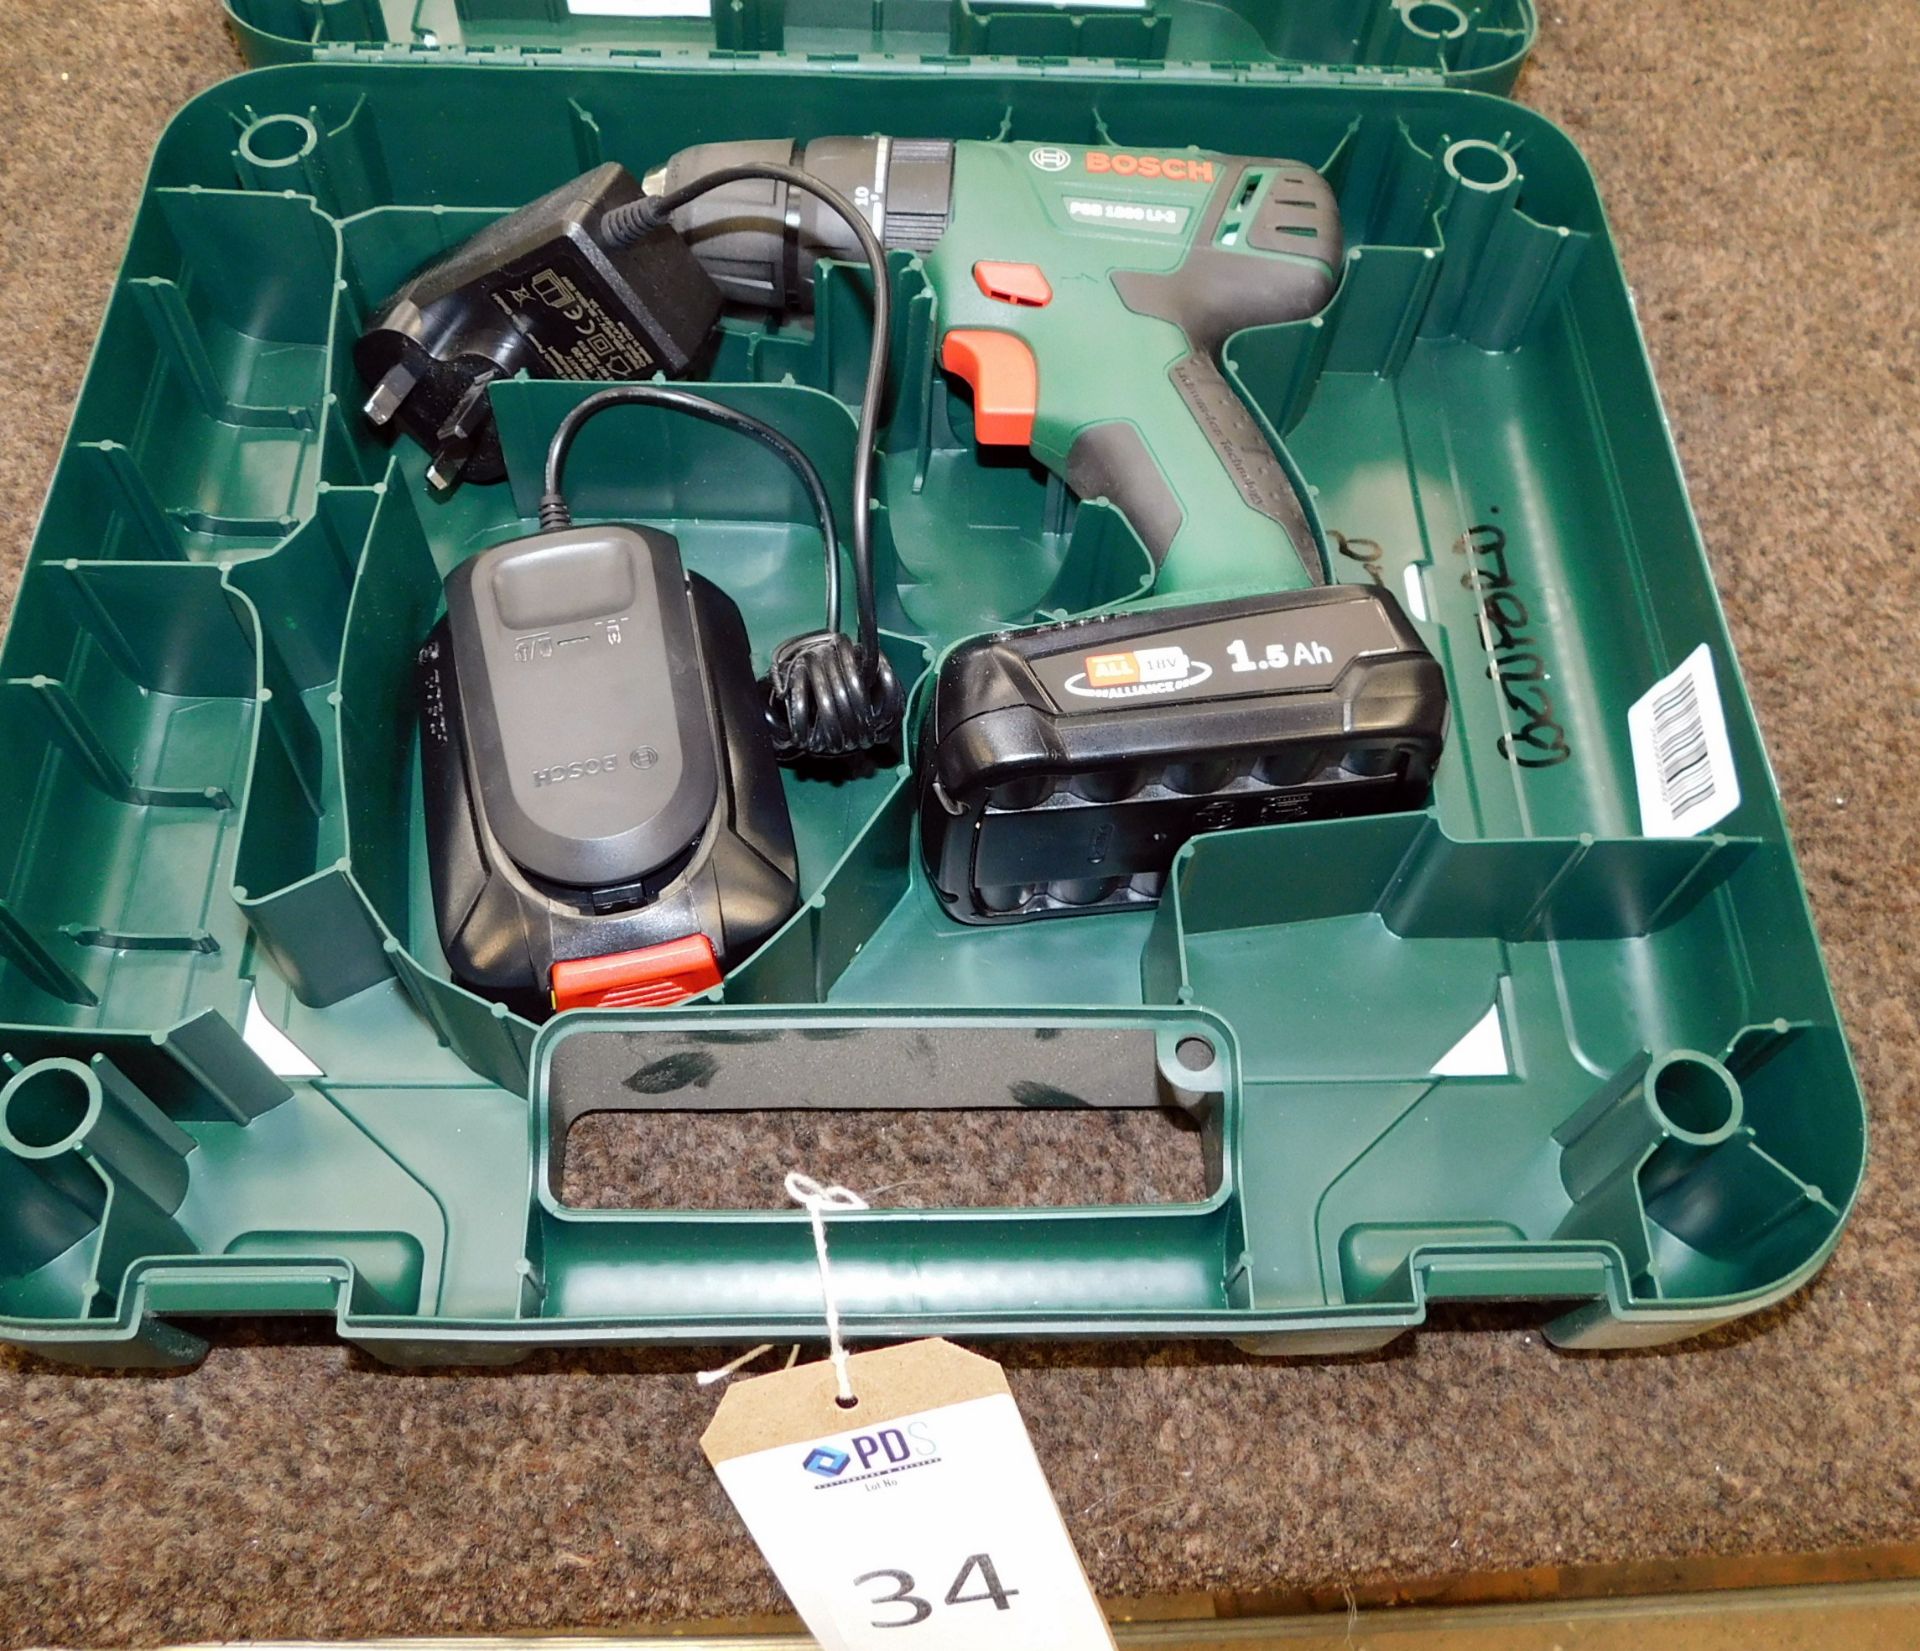 Bosch PSB1800LI-2 Cordless Drill with 2 Batteries & Charger (Location: Bedford. Please Refer to